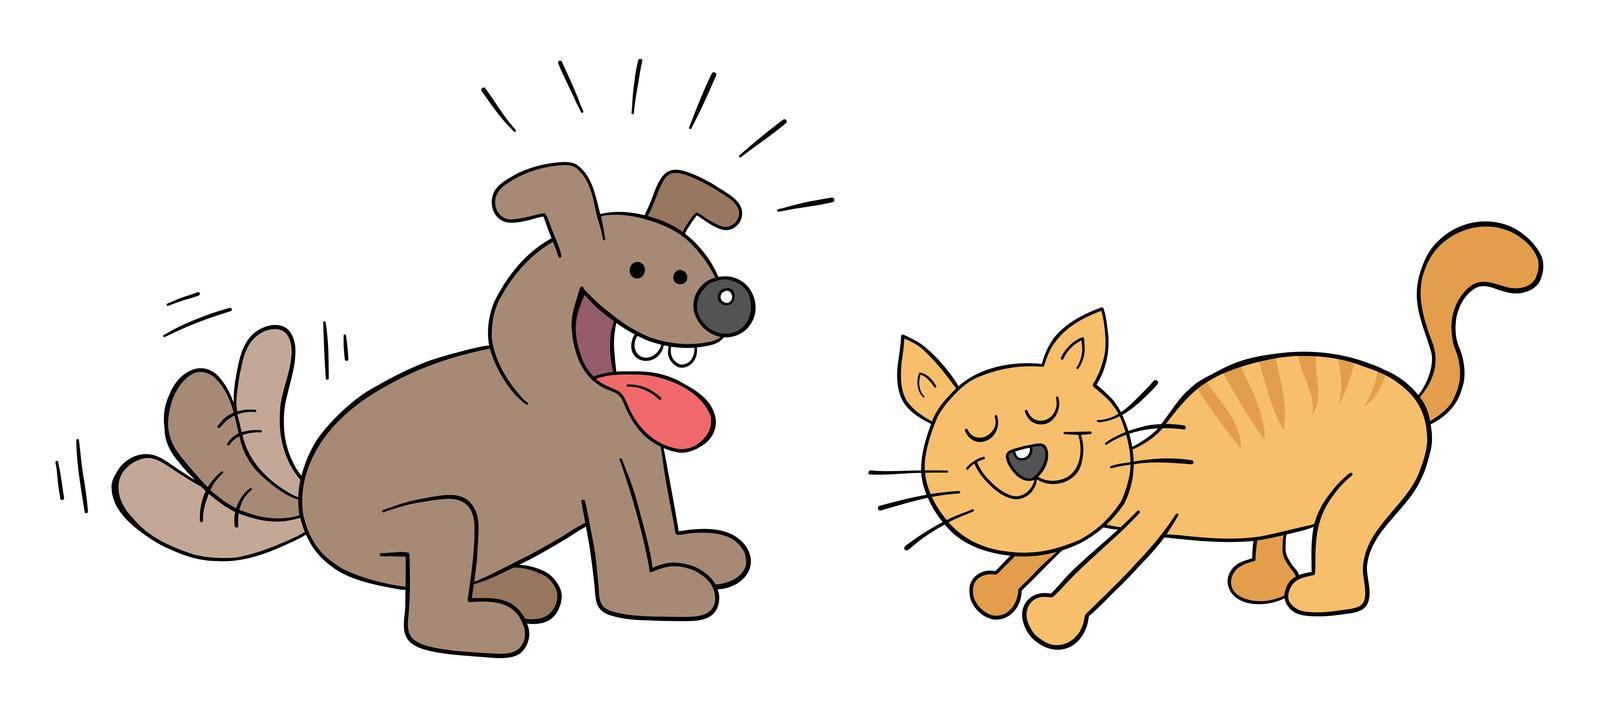 Cartoon happy dog and cat friendship, vector illustration by emrahavci